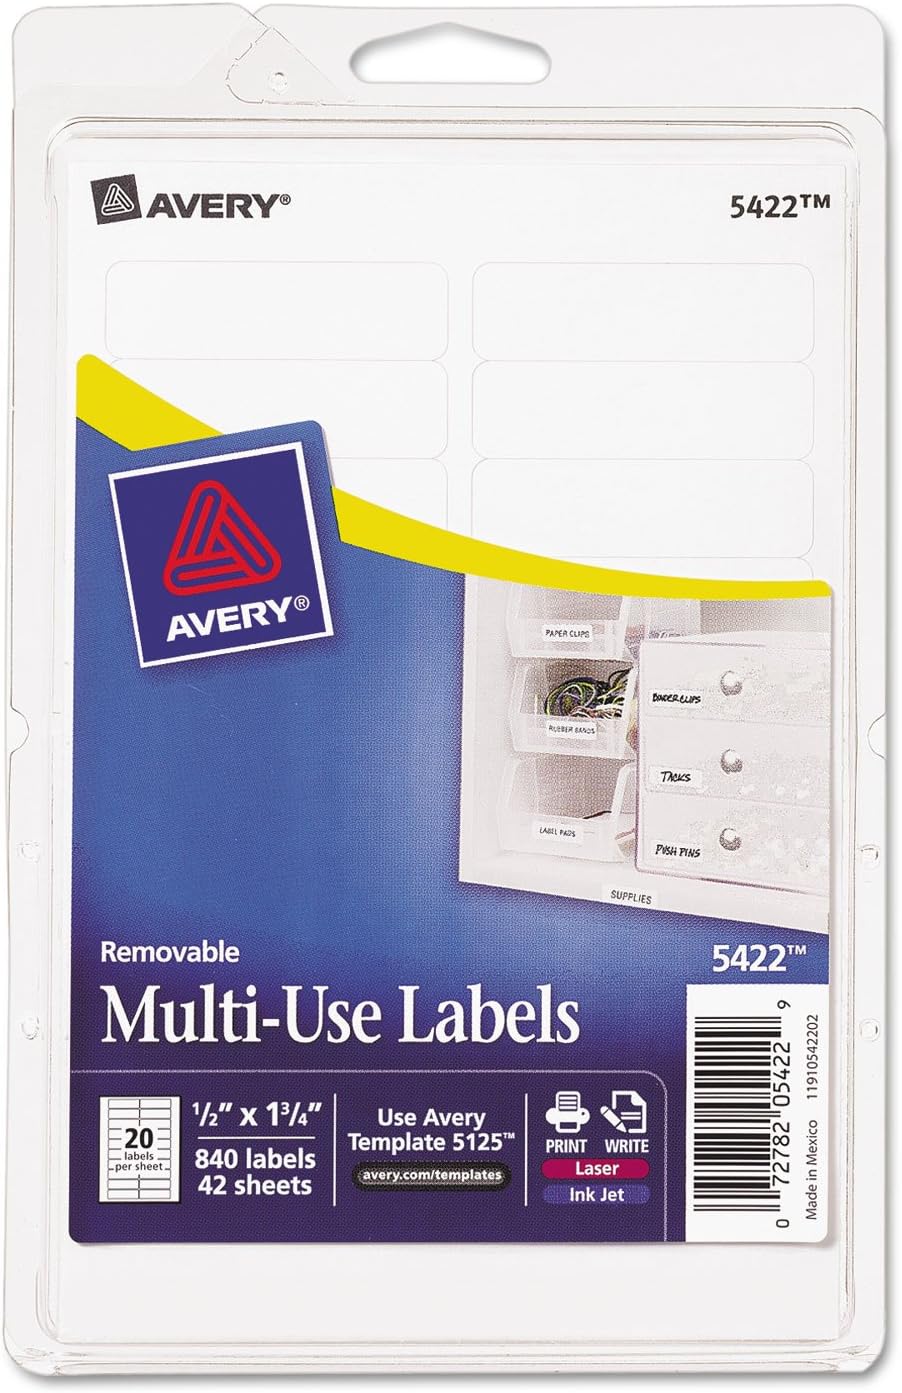 Avery 05422 Removable Multi-Use Labels, 1/2-Inch X 1-3/4-Inch, White, 840 Labels/Pack